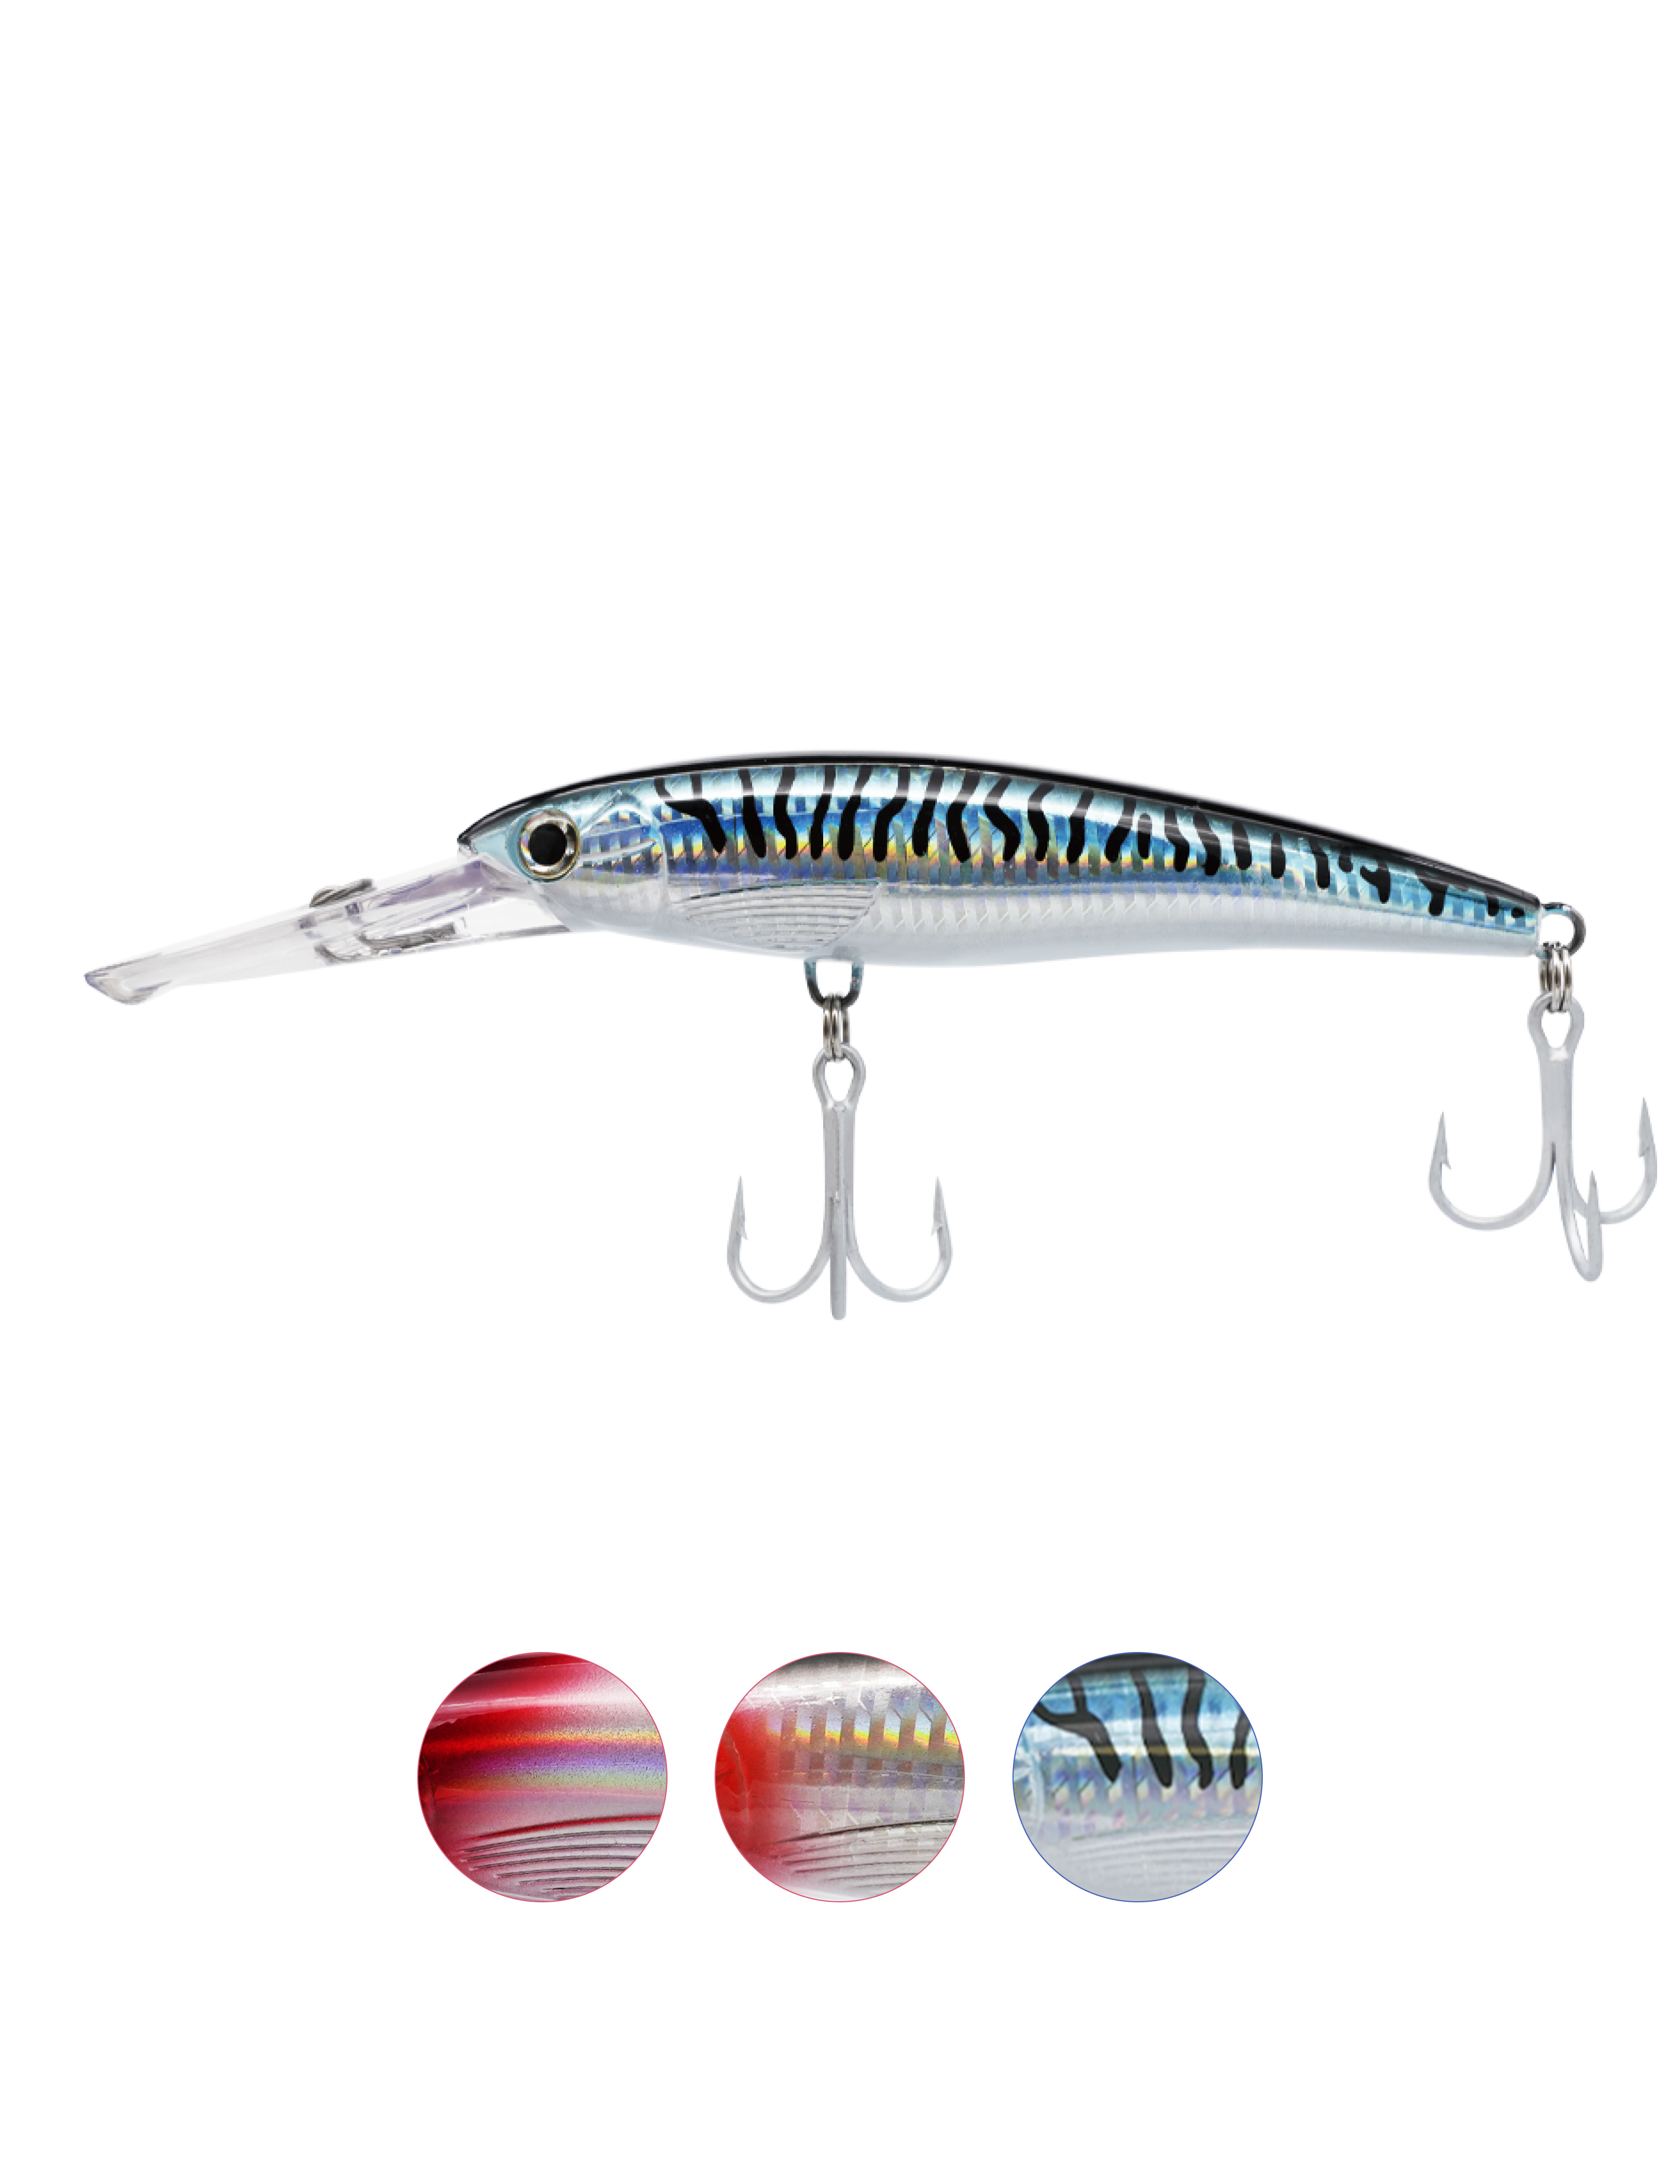 Bluewing Fishing - Big Game Fishing Tackle and Boat Accessories